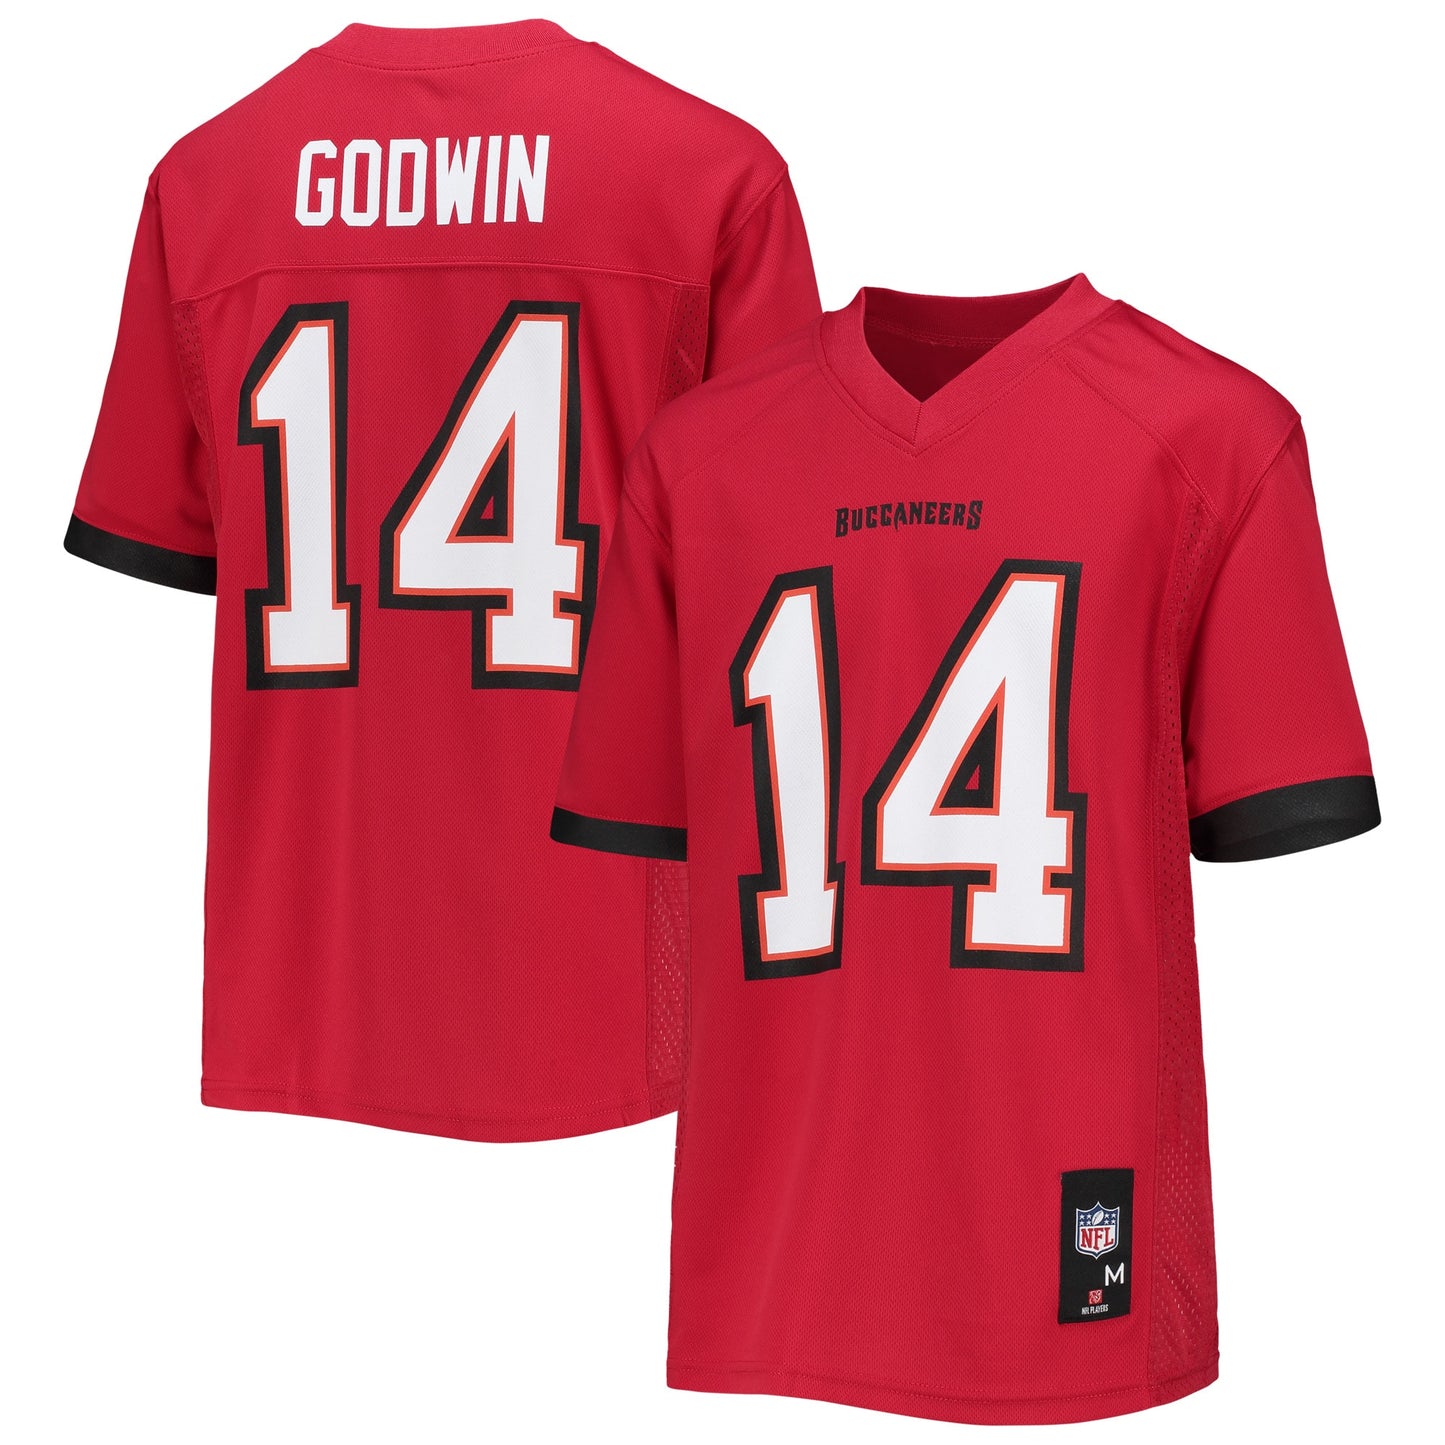 Chris Godwin Tampa Bay Buccaneers Youth Replica Player Jersey - Red